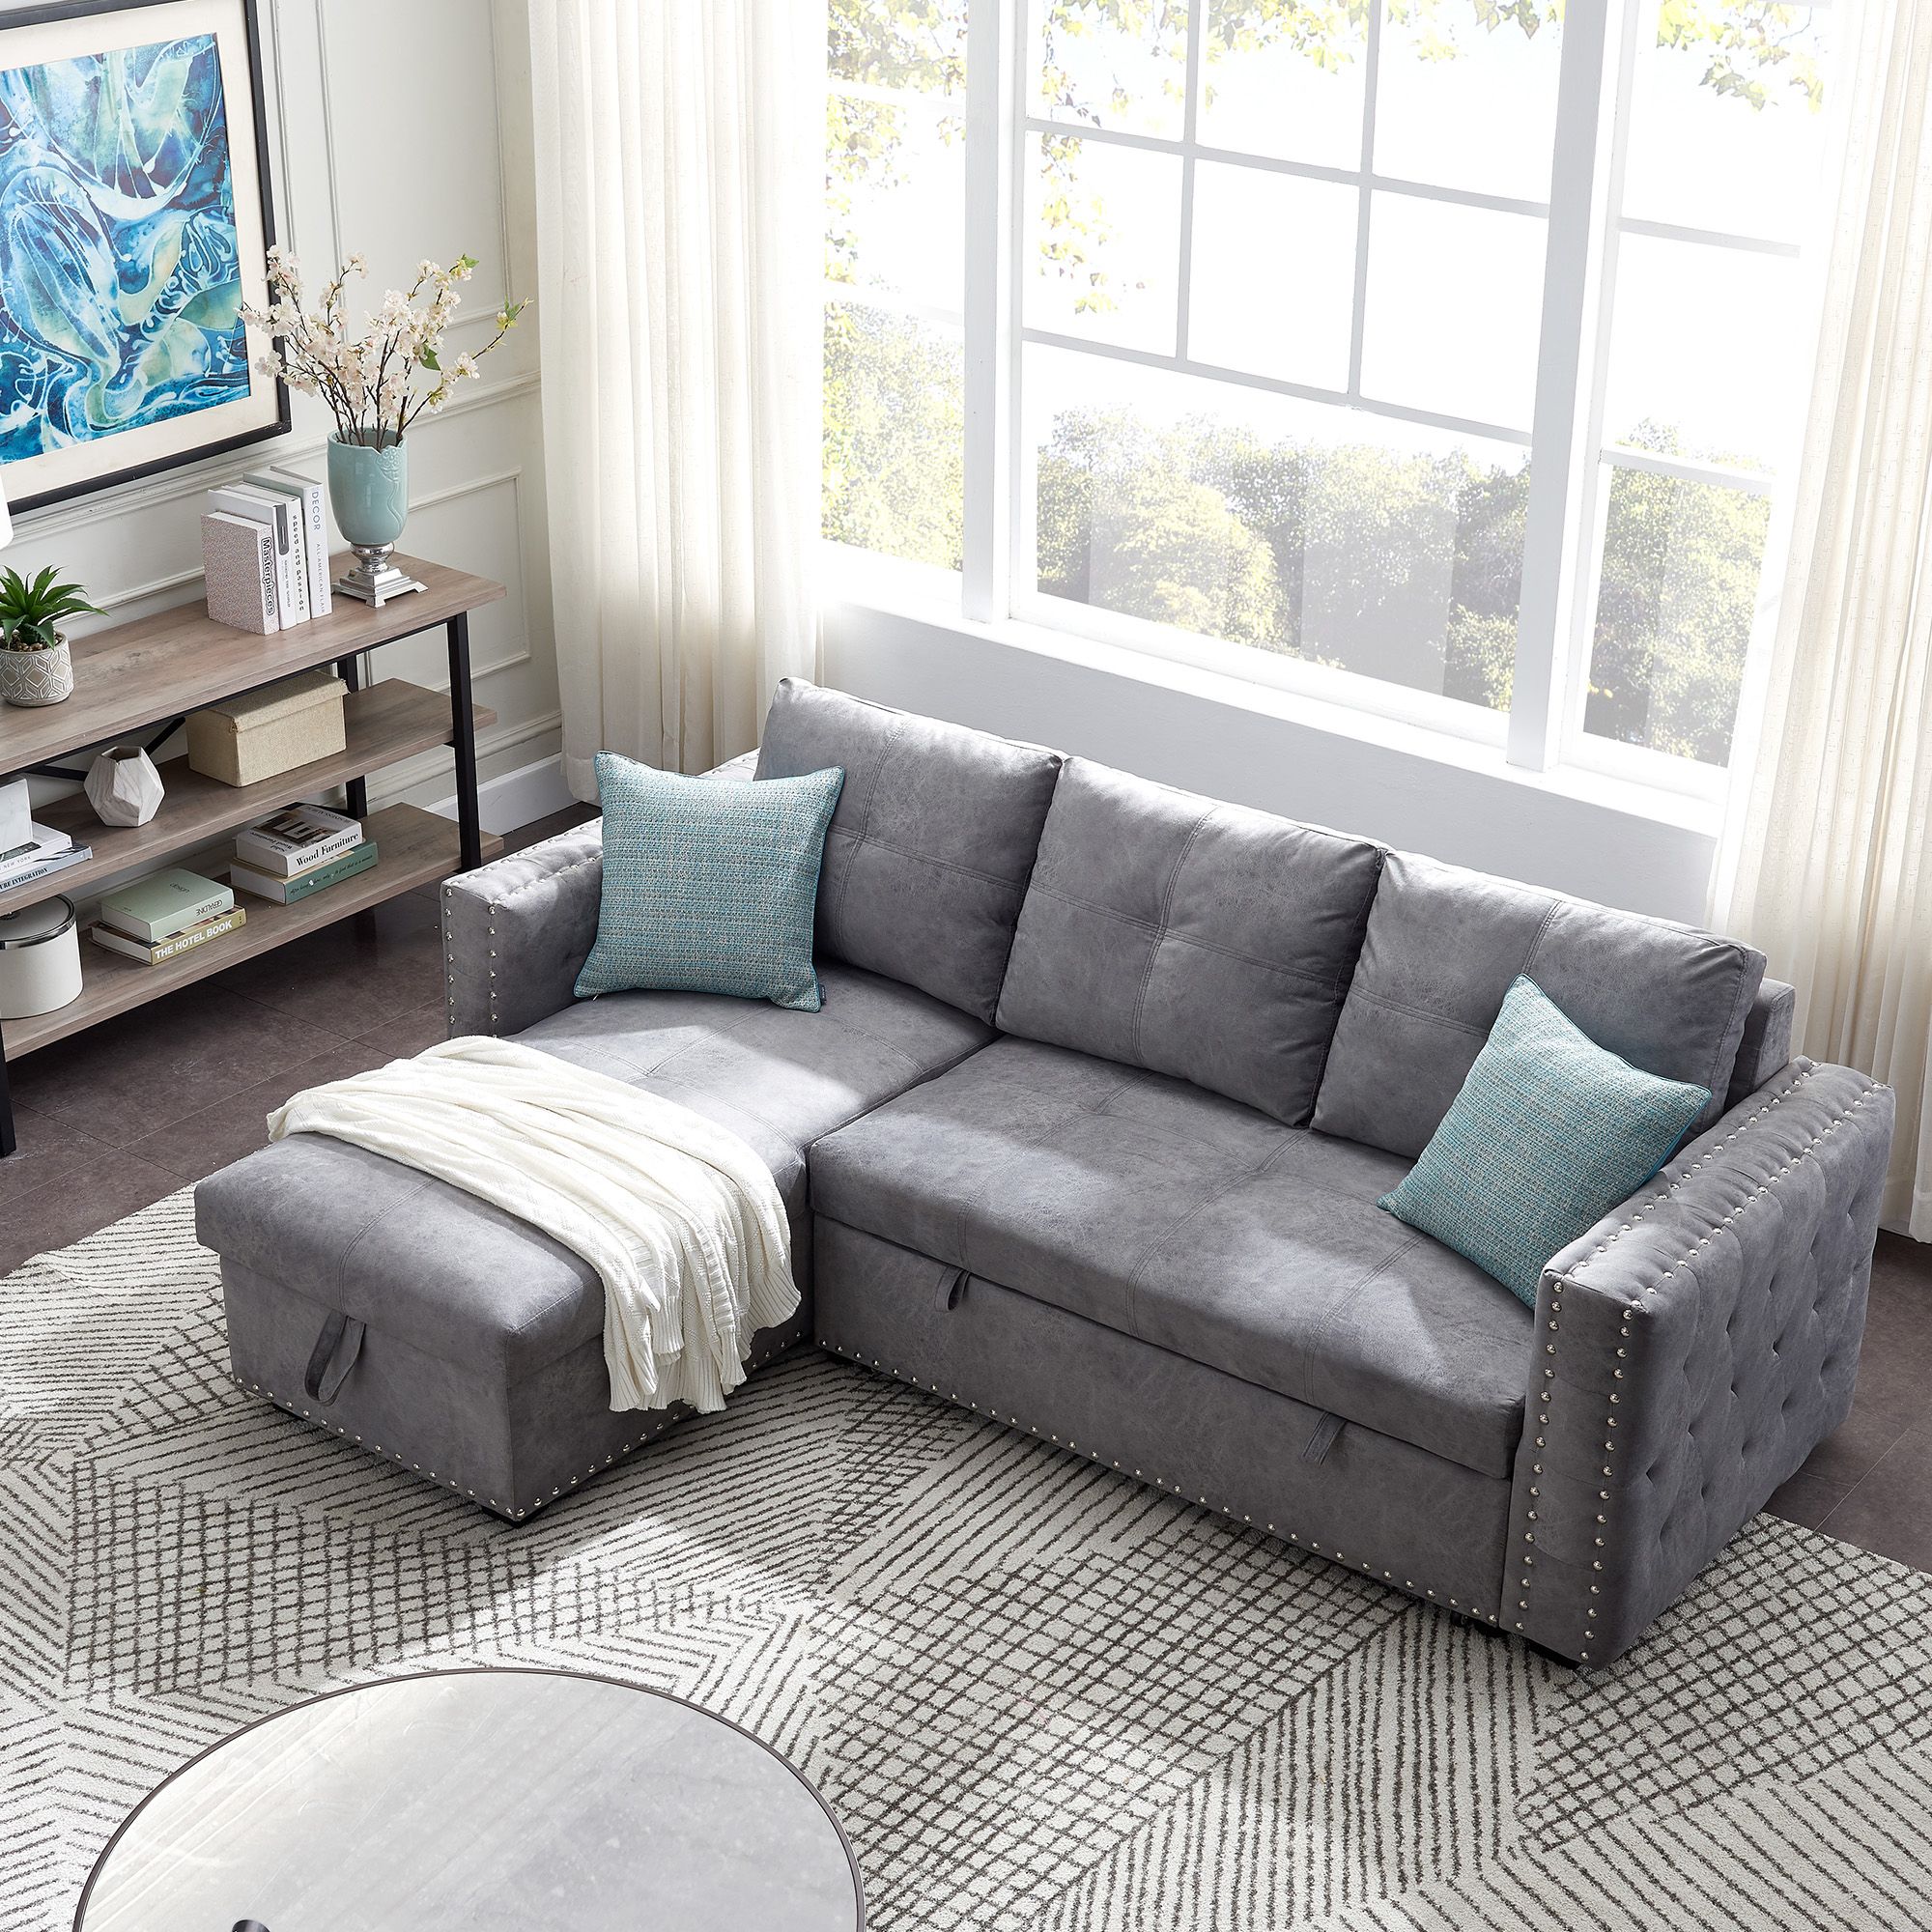 Segmart Sectional Sofas, Modern Upholstered Sofa With Pertaining To Live It Cozy Sectional Sofa Beds With Storage (Photo 1 of 15)